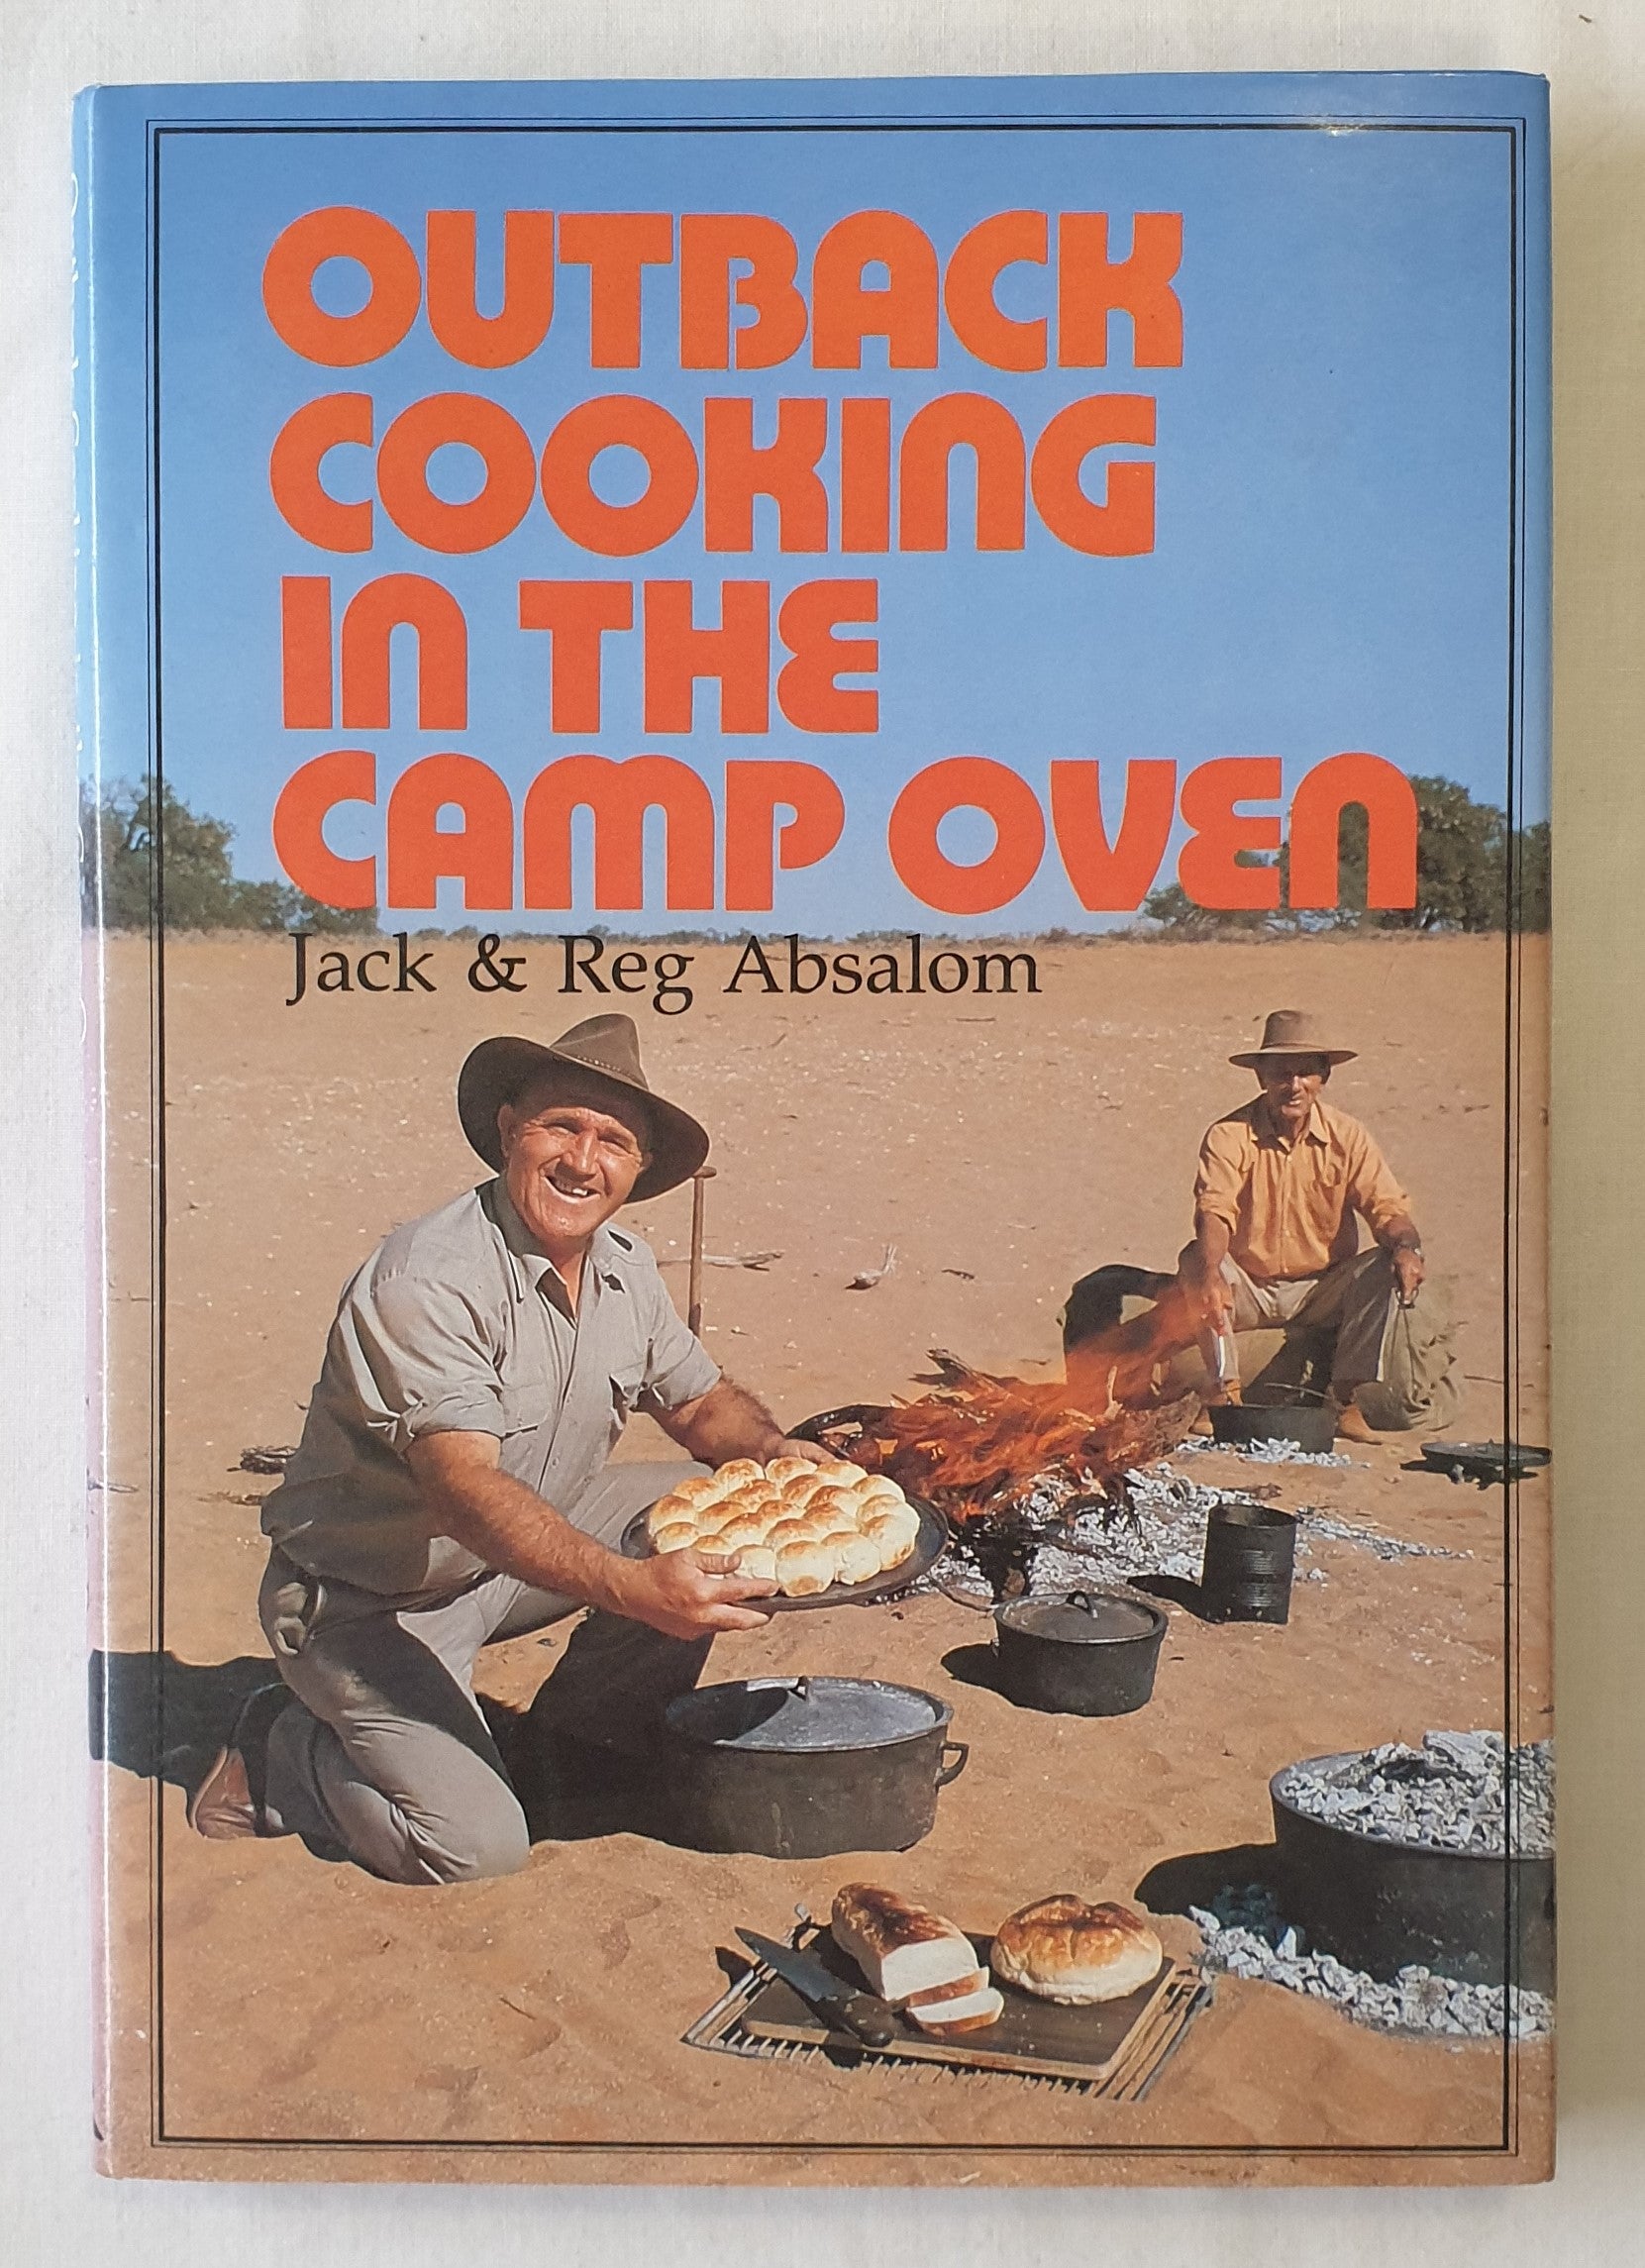 Outback Cooking in the Camp Oven by Jack and Reg Absalom